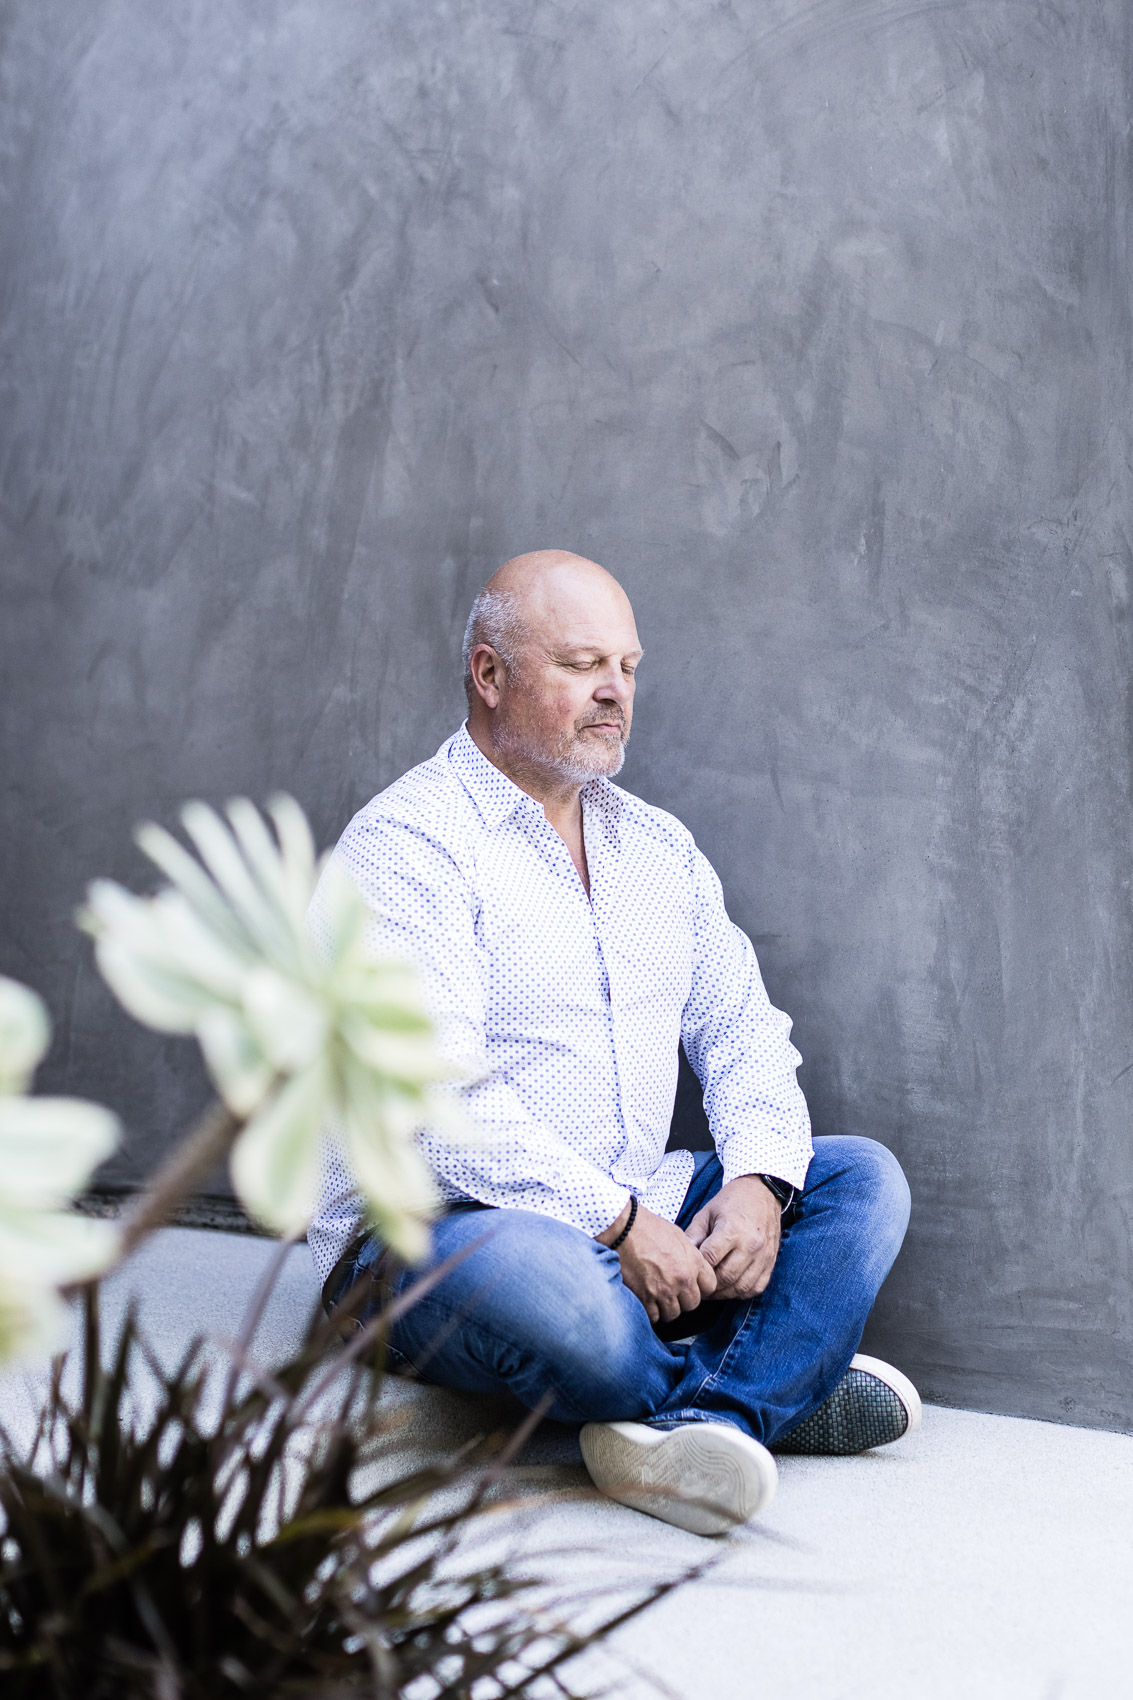 Michael Chiklis, actor, producer & director | Los Angeles | Editorial and Commercial Photographer Patrick Strattner